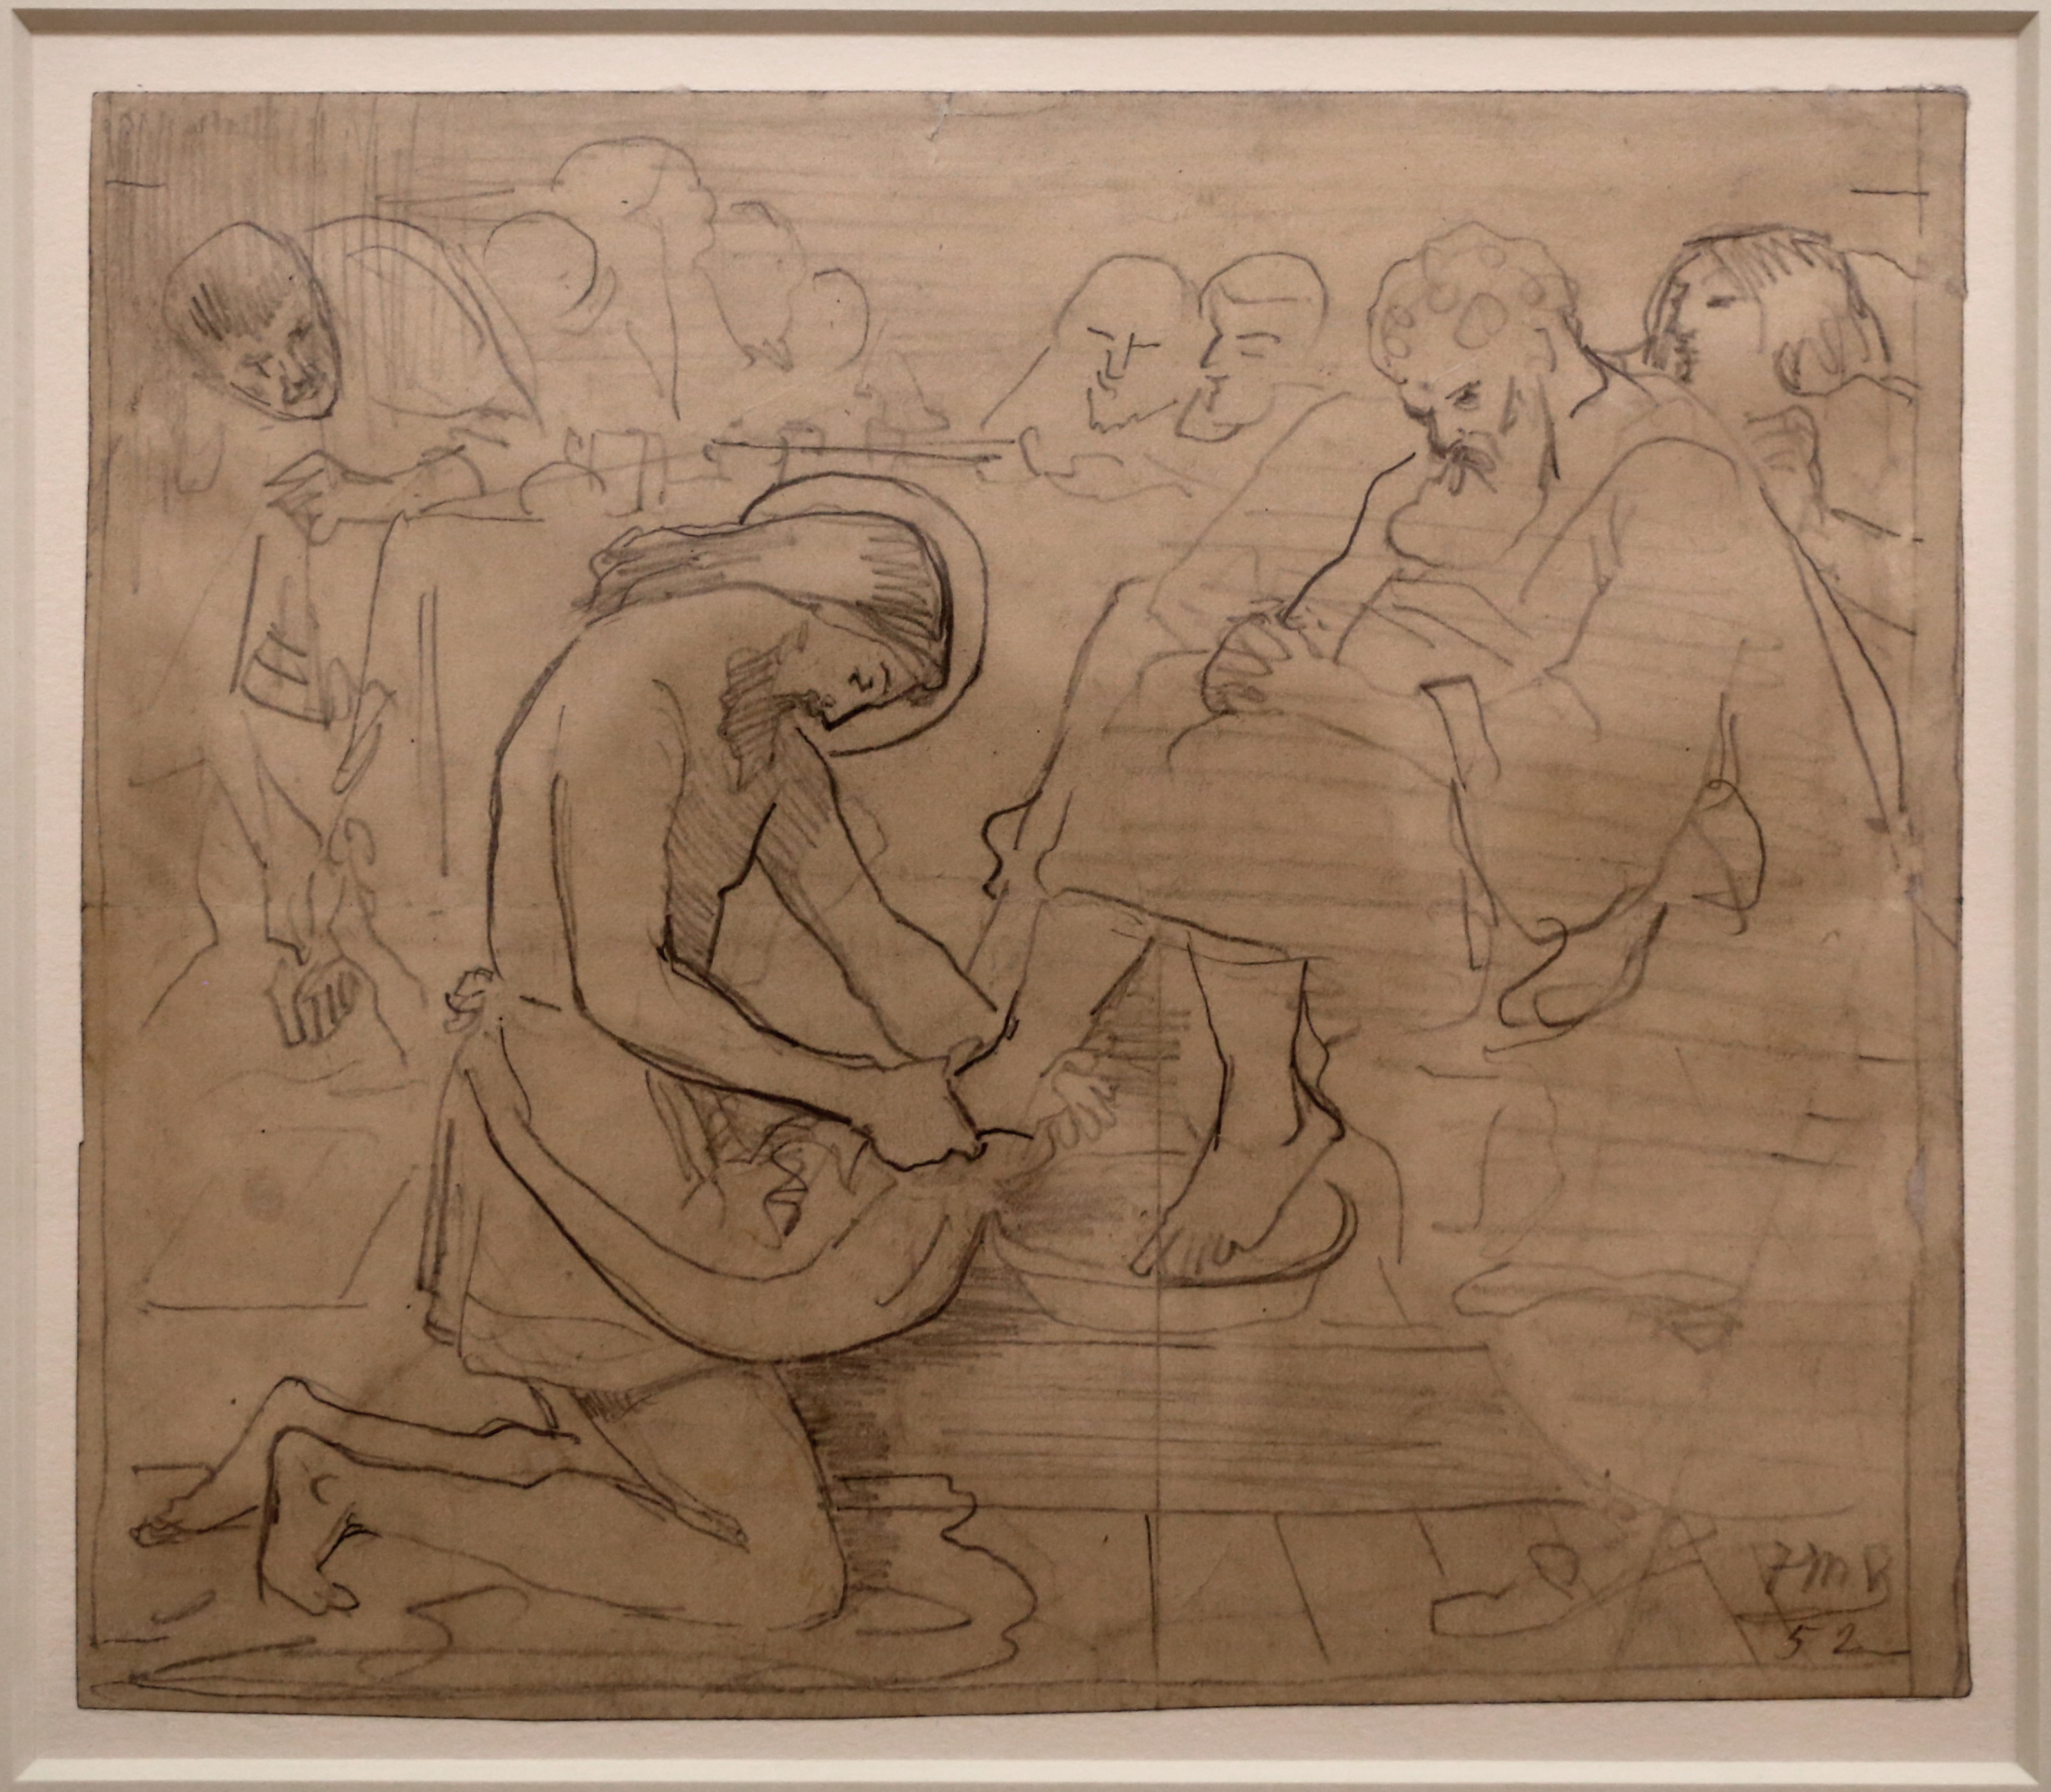 Peter washes. Jesus Washes the feet of his Disciples.